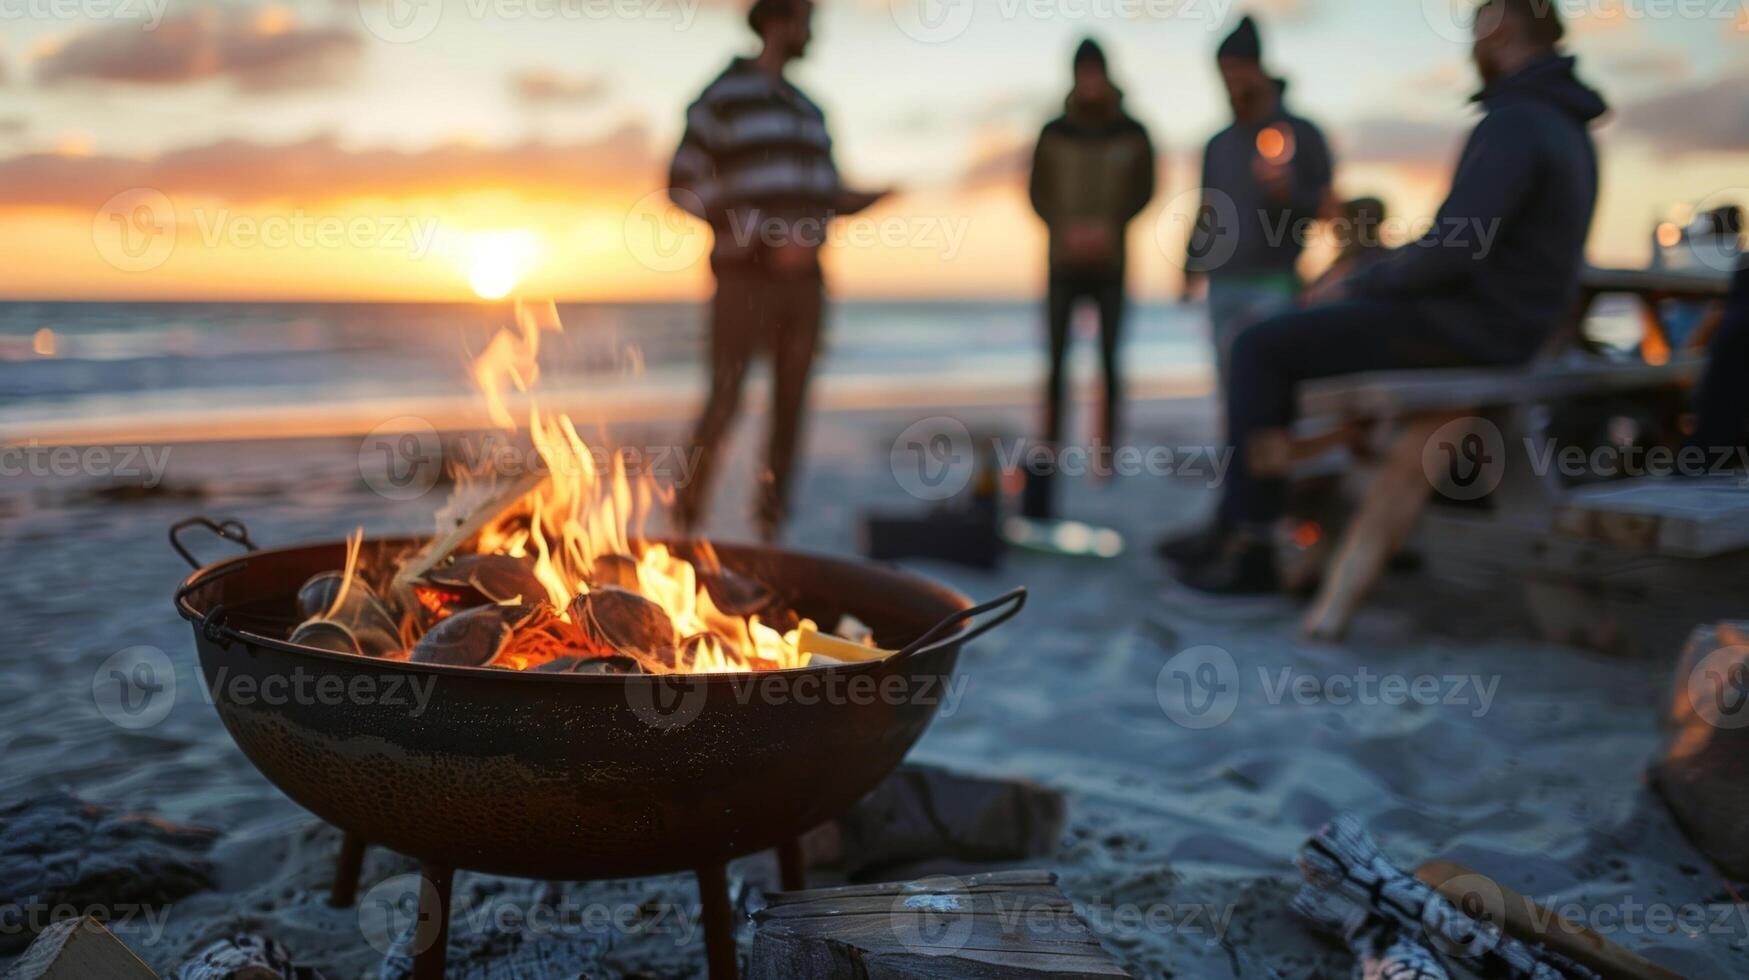 With the sound of waves crashing in the background a group of nature enthusiasts gather around a fire pit on the beach preparing a delightful meal of locally sourced seafood photo